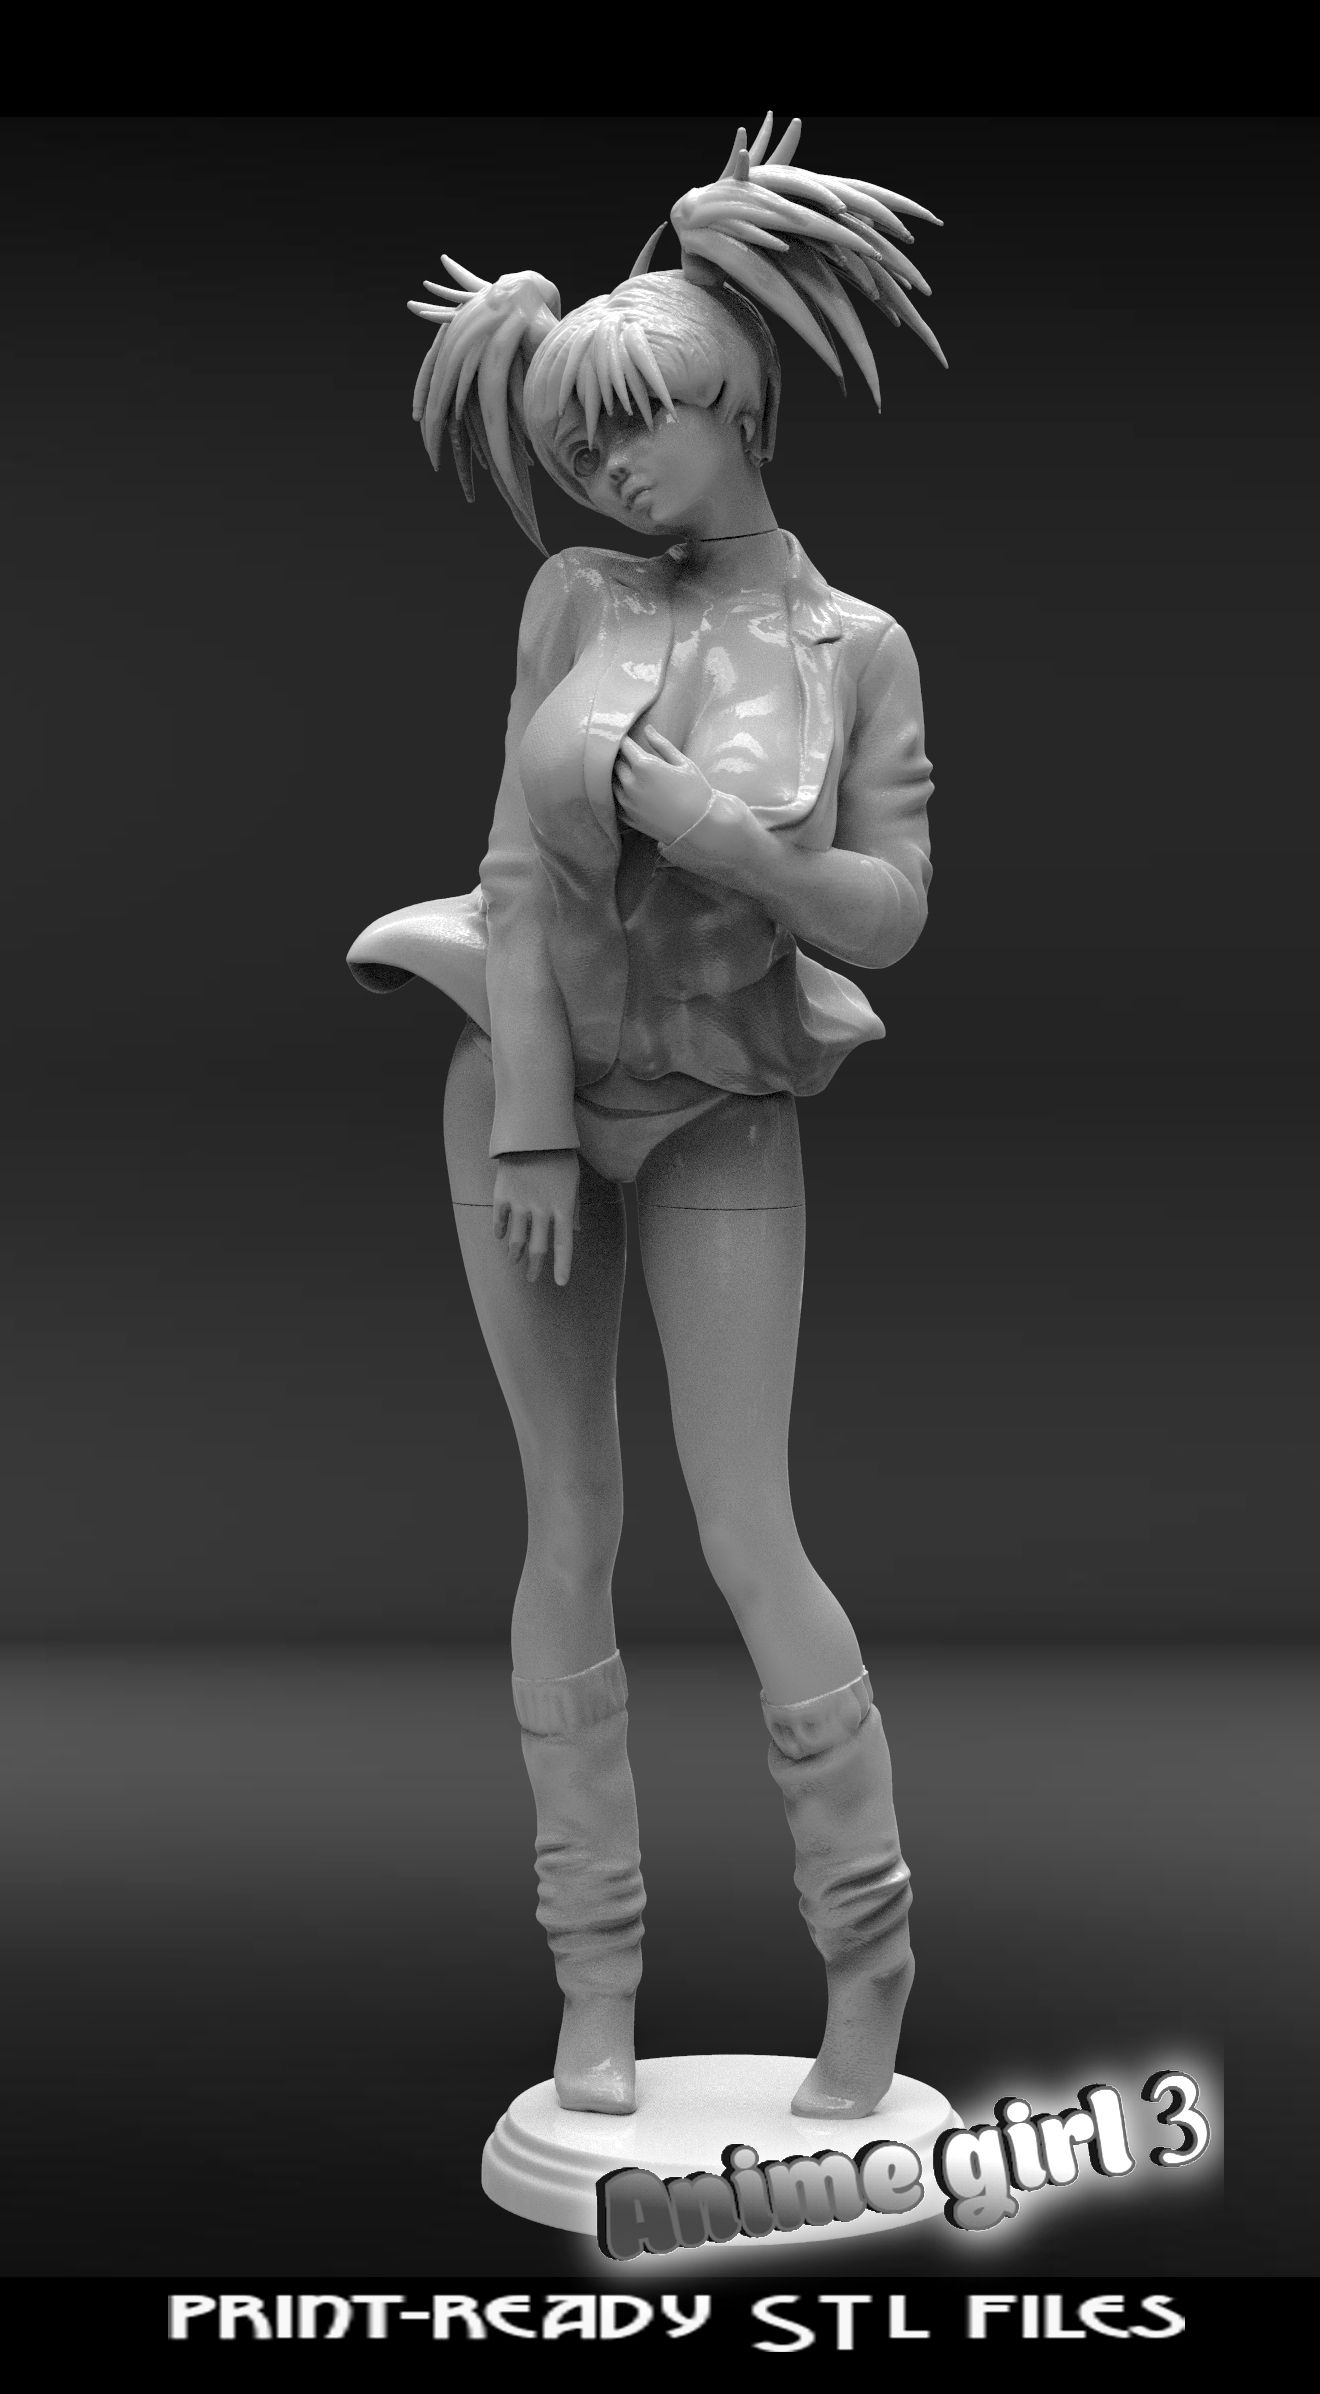 untitled.7епо08.jpg Download STL file Anime girl 3 • Model to 3D print, walades